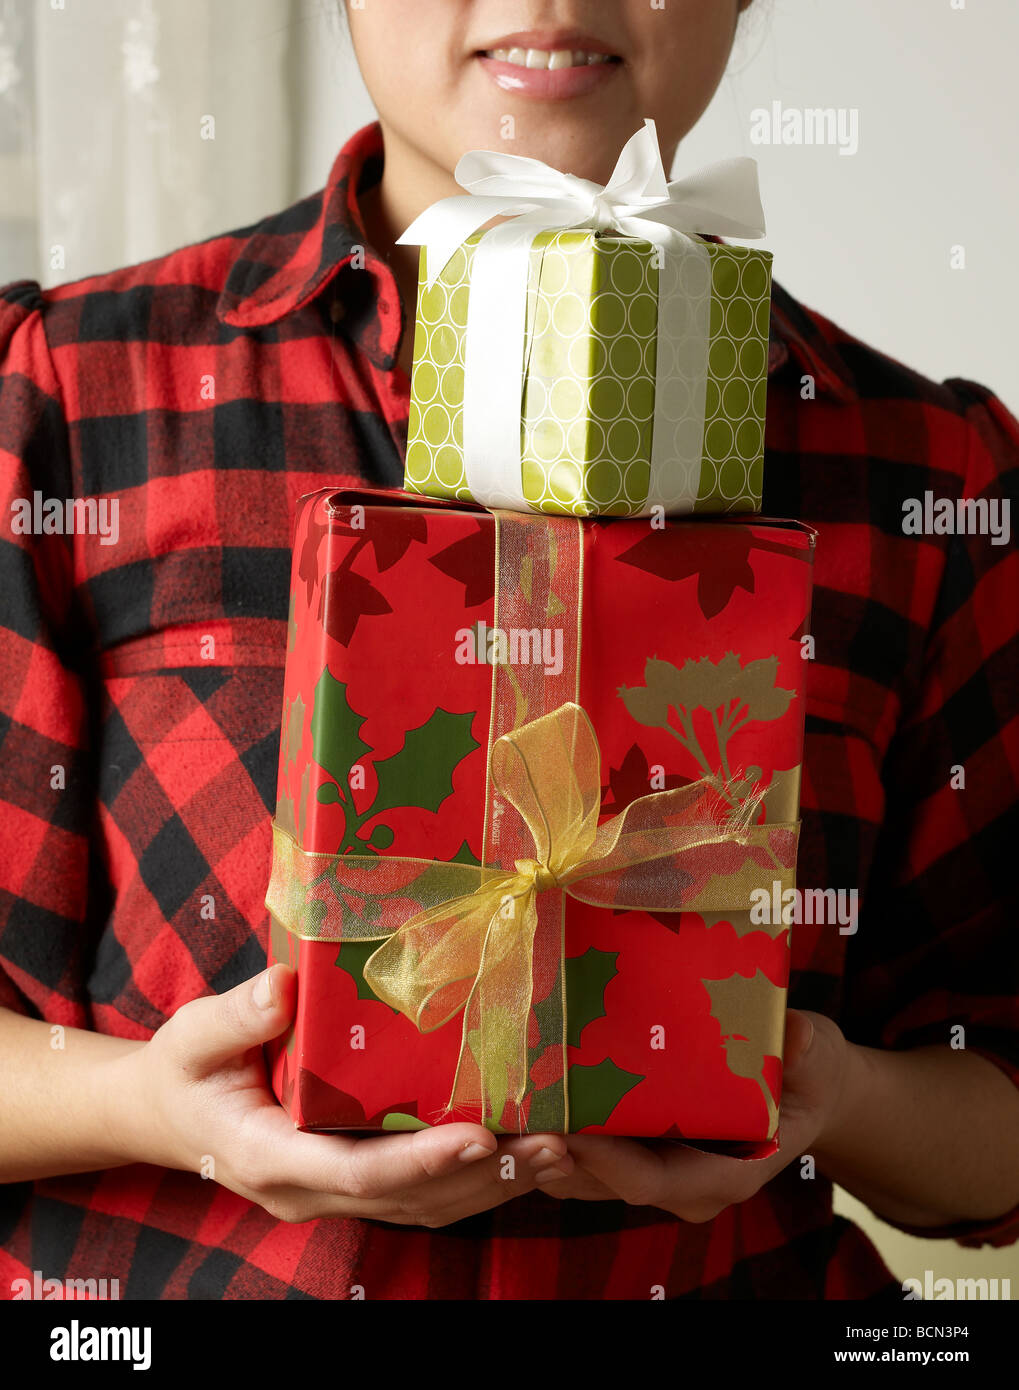 Woman Holding Two Christmas Presents Stock Photo